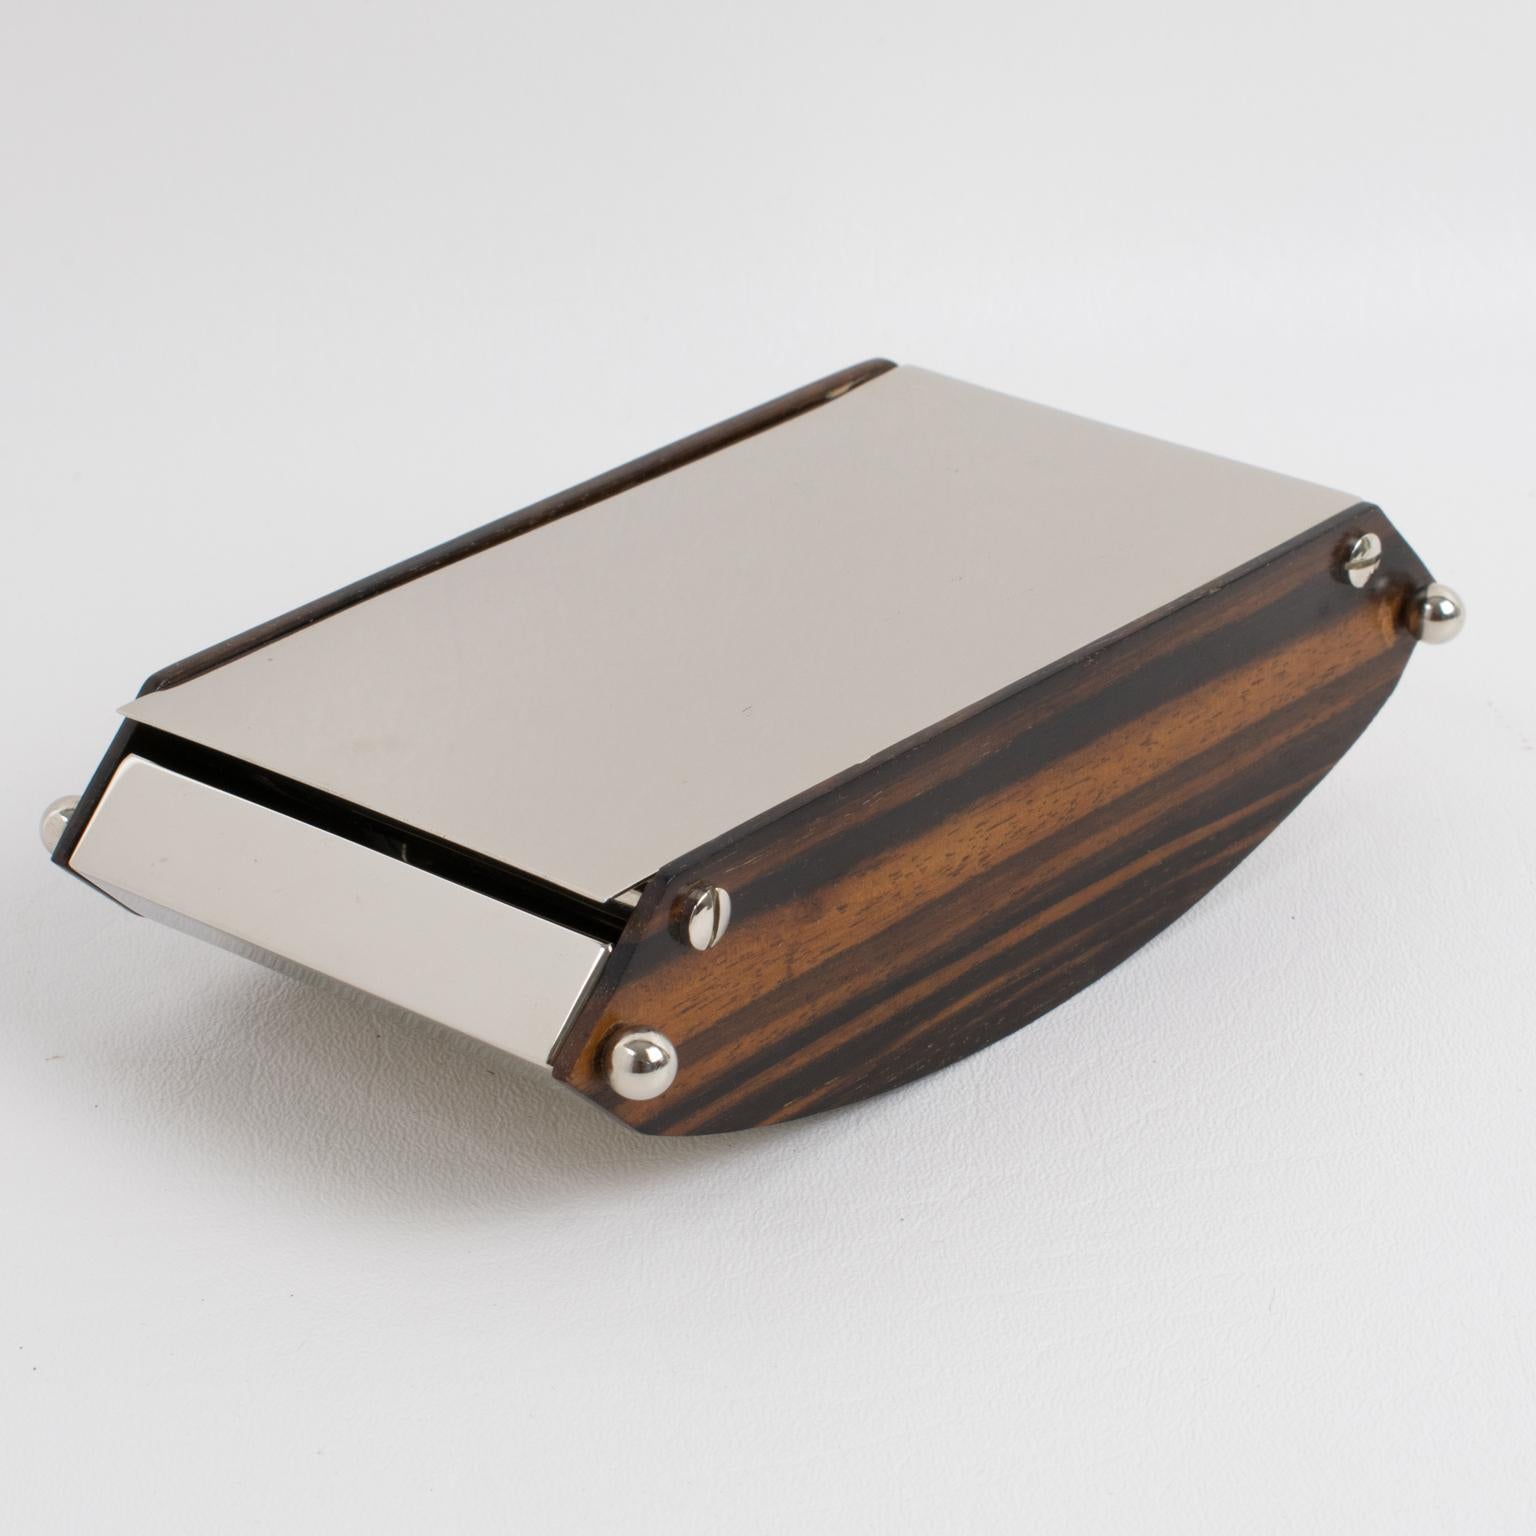 Maison Desny Style Art Deco Macassar Wood and Chrome Metal Box, 1930s For Sale 4